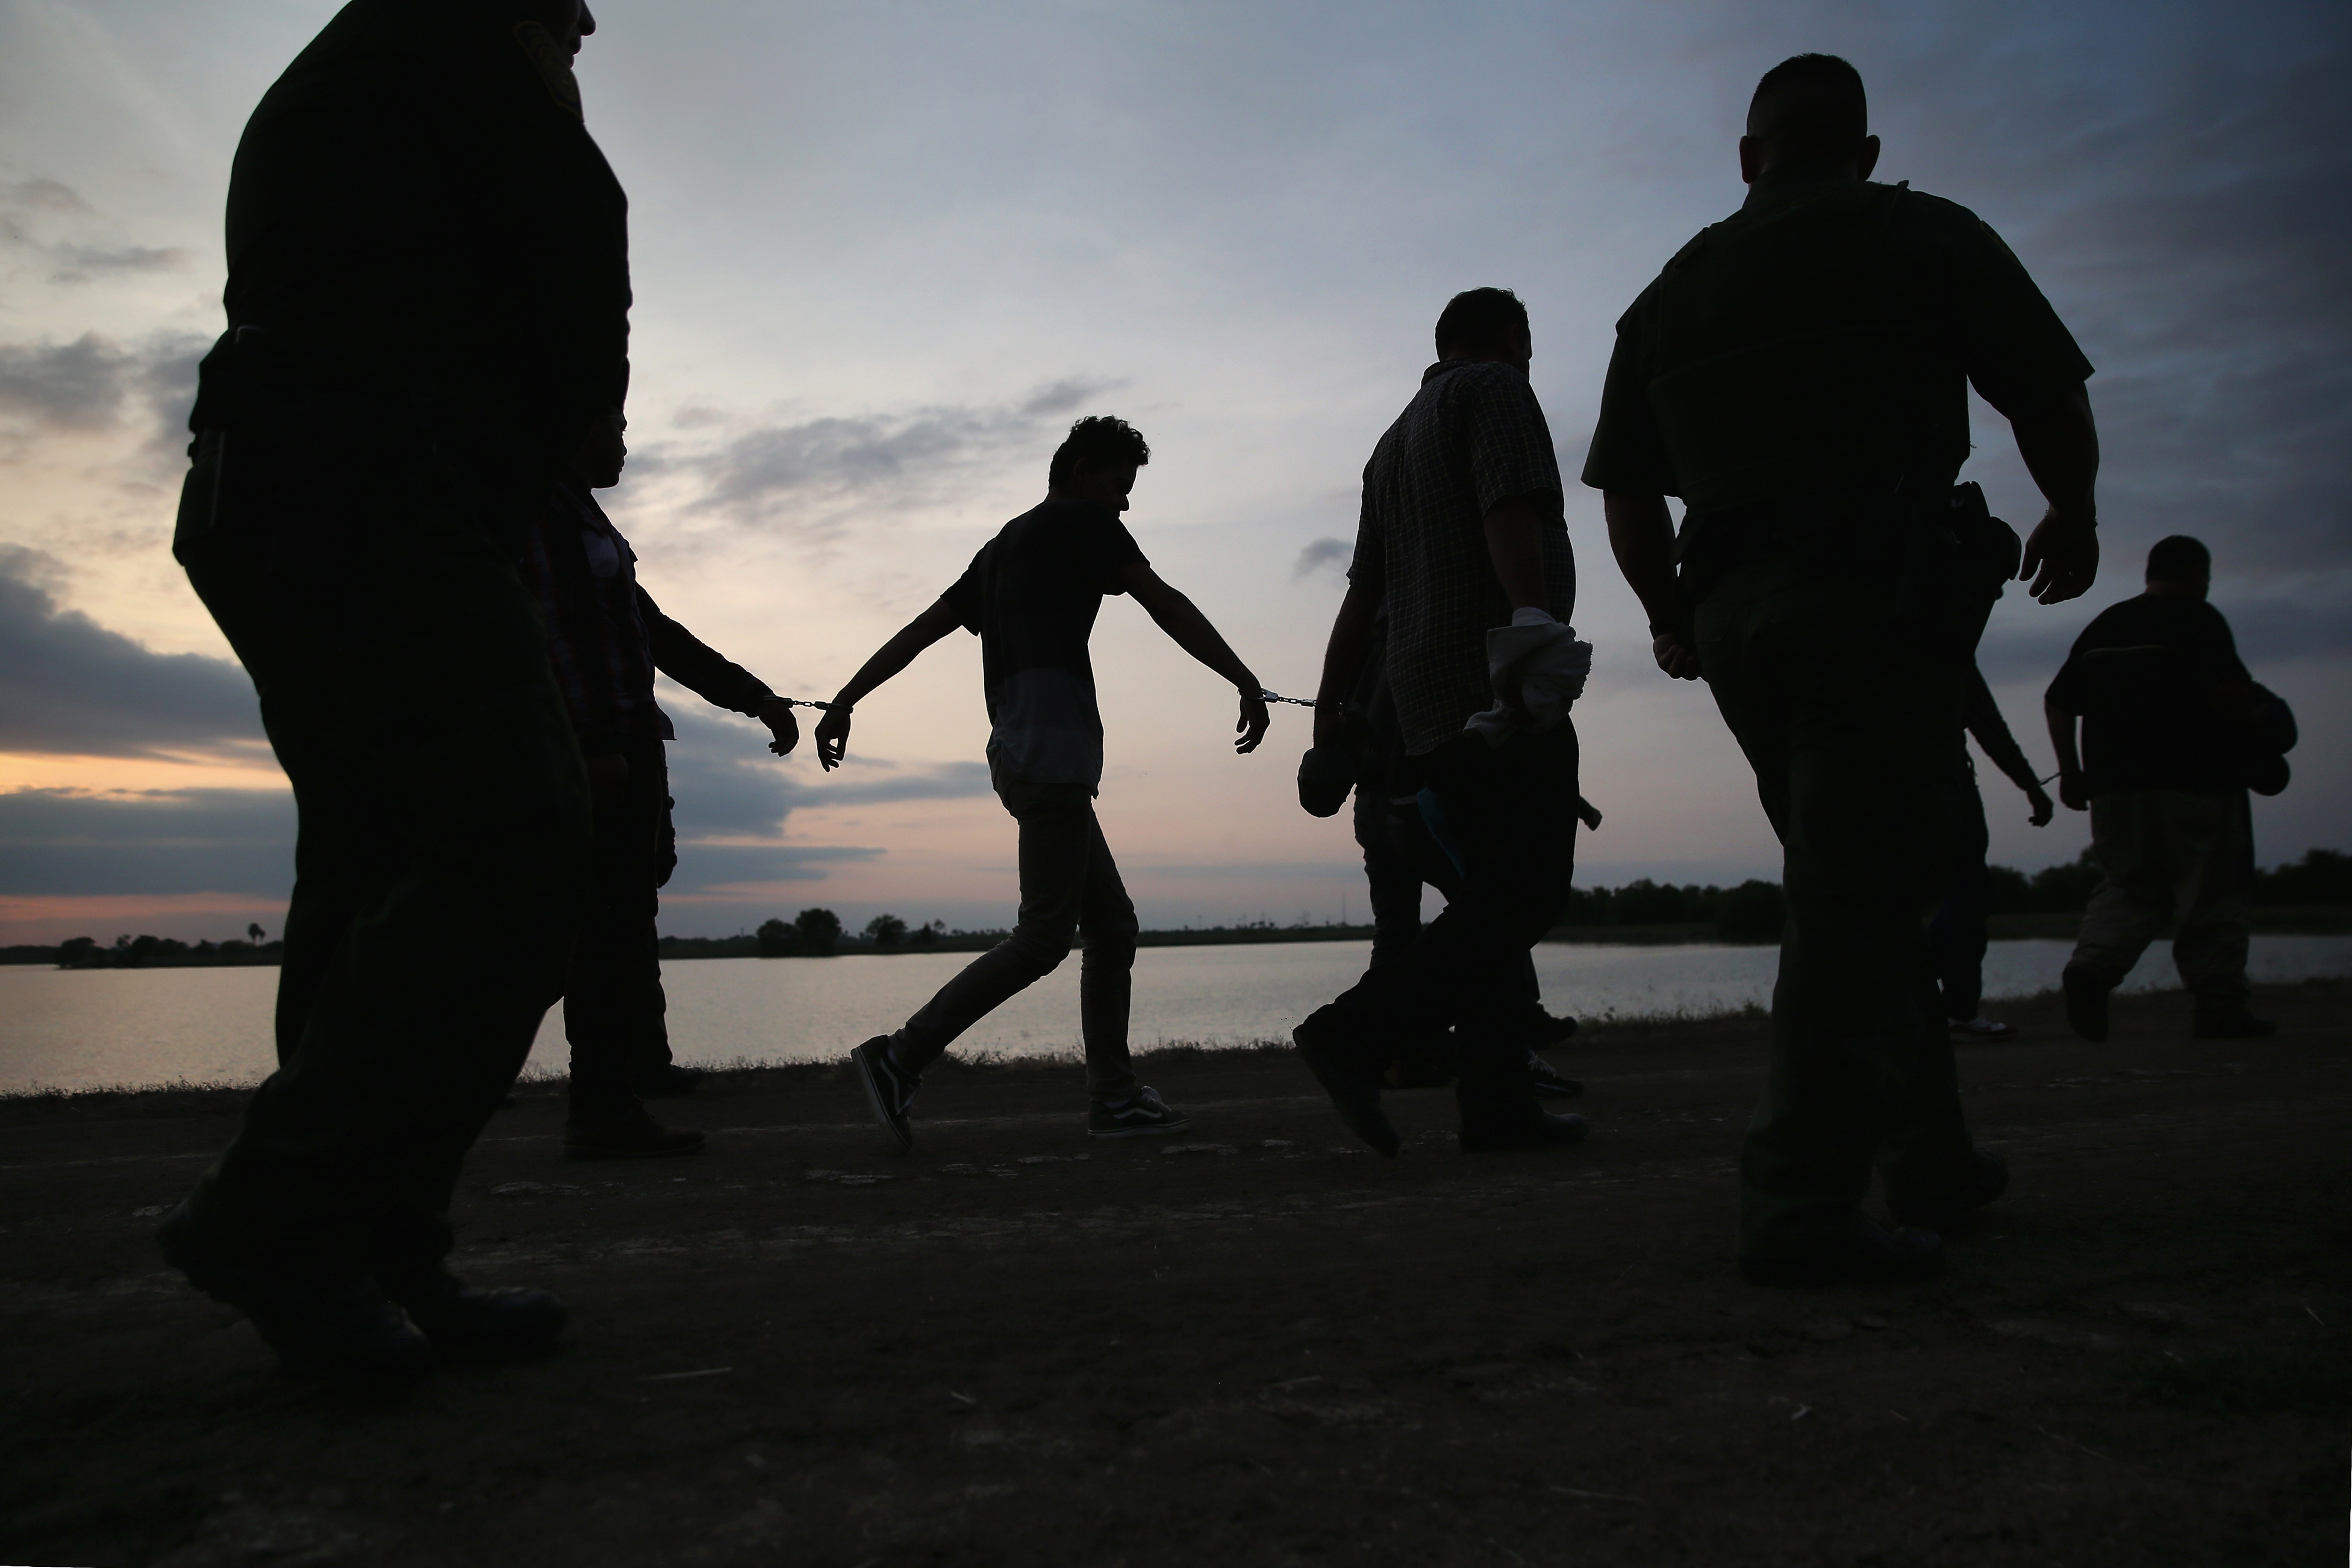 Undocumented immigrants are led after being caught and handcuffed by Border Patrol agents near the U.S.-Mexico border in Weslaco, Texas on April 13, 2016. (John Moore—Getty Images)